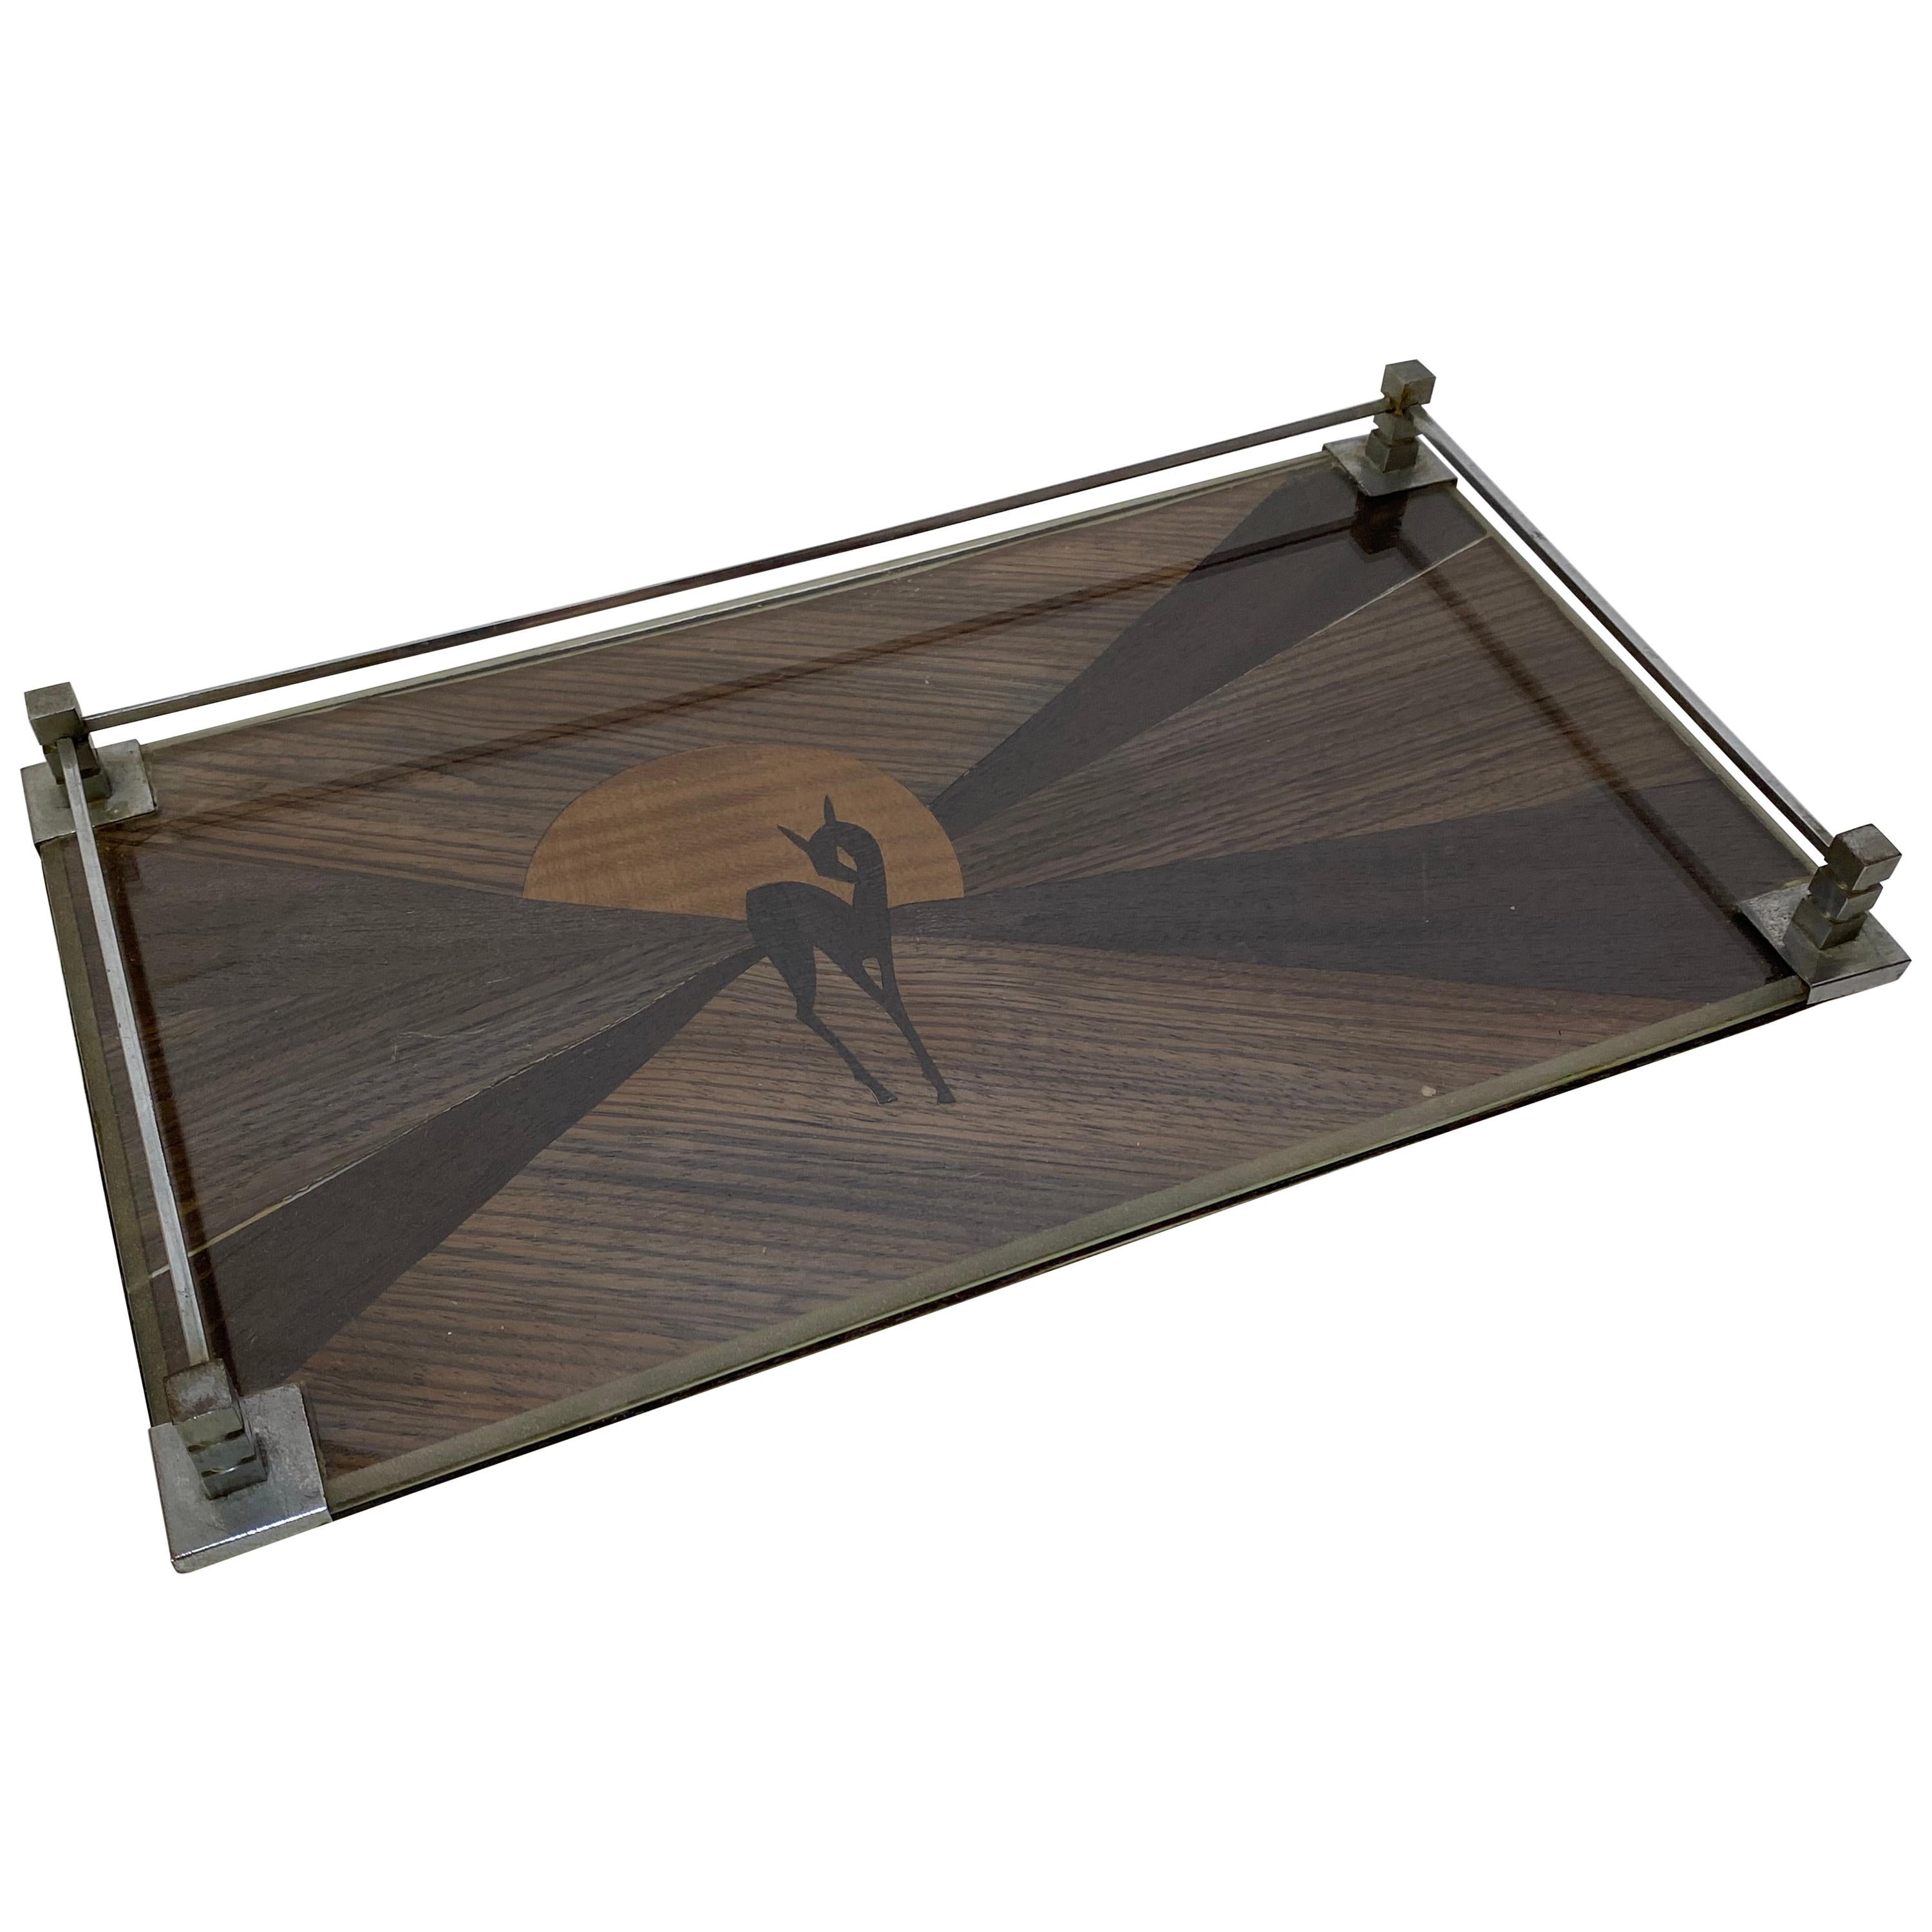 Exotic Hardwood Inlaid Glass and Nickel Art Deco Tray with Faun